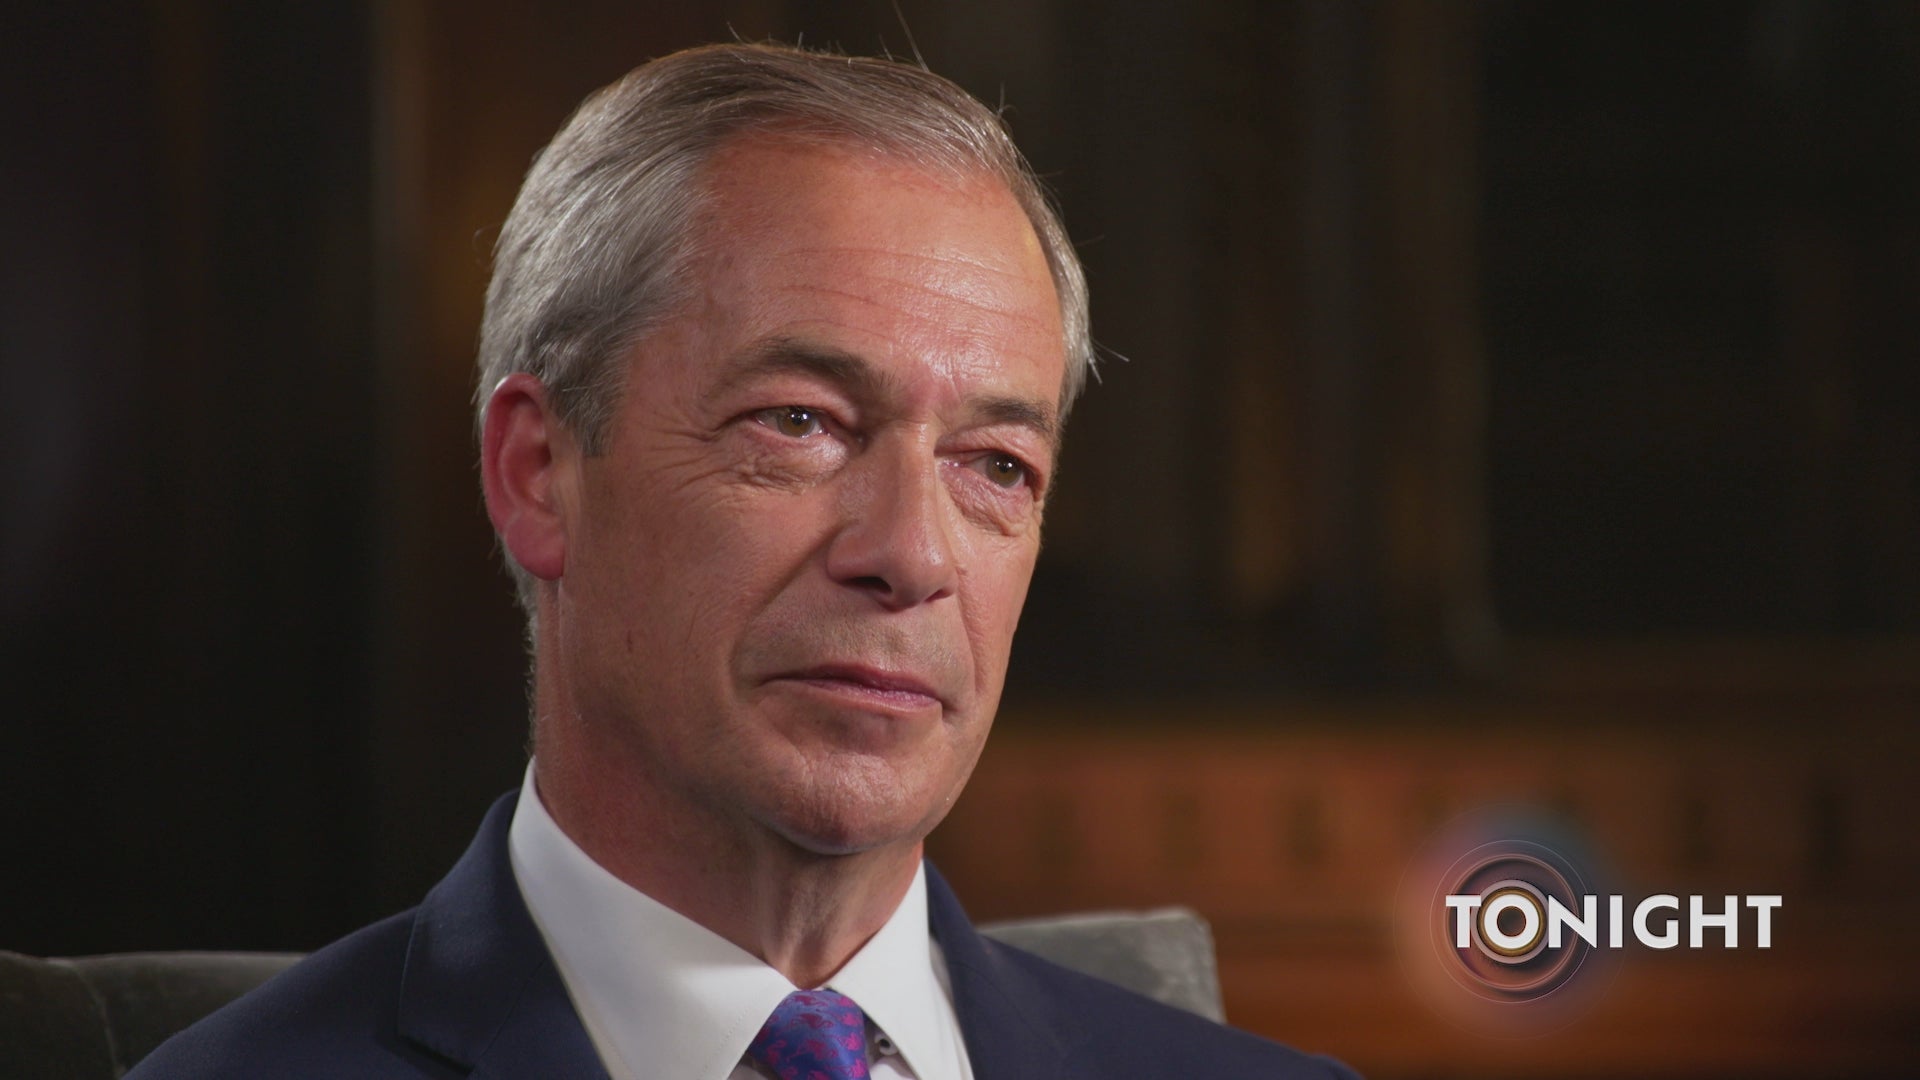 Nigel Farage has claimed Donald Trump ‘learned a lot’ from studying the Reform UK leader’s speeches in the European Parliament before he ran for office